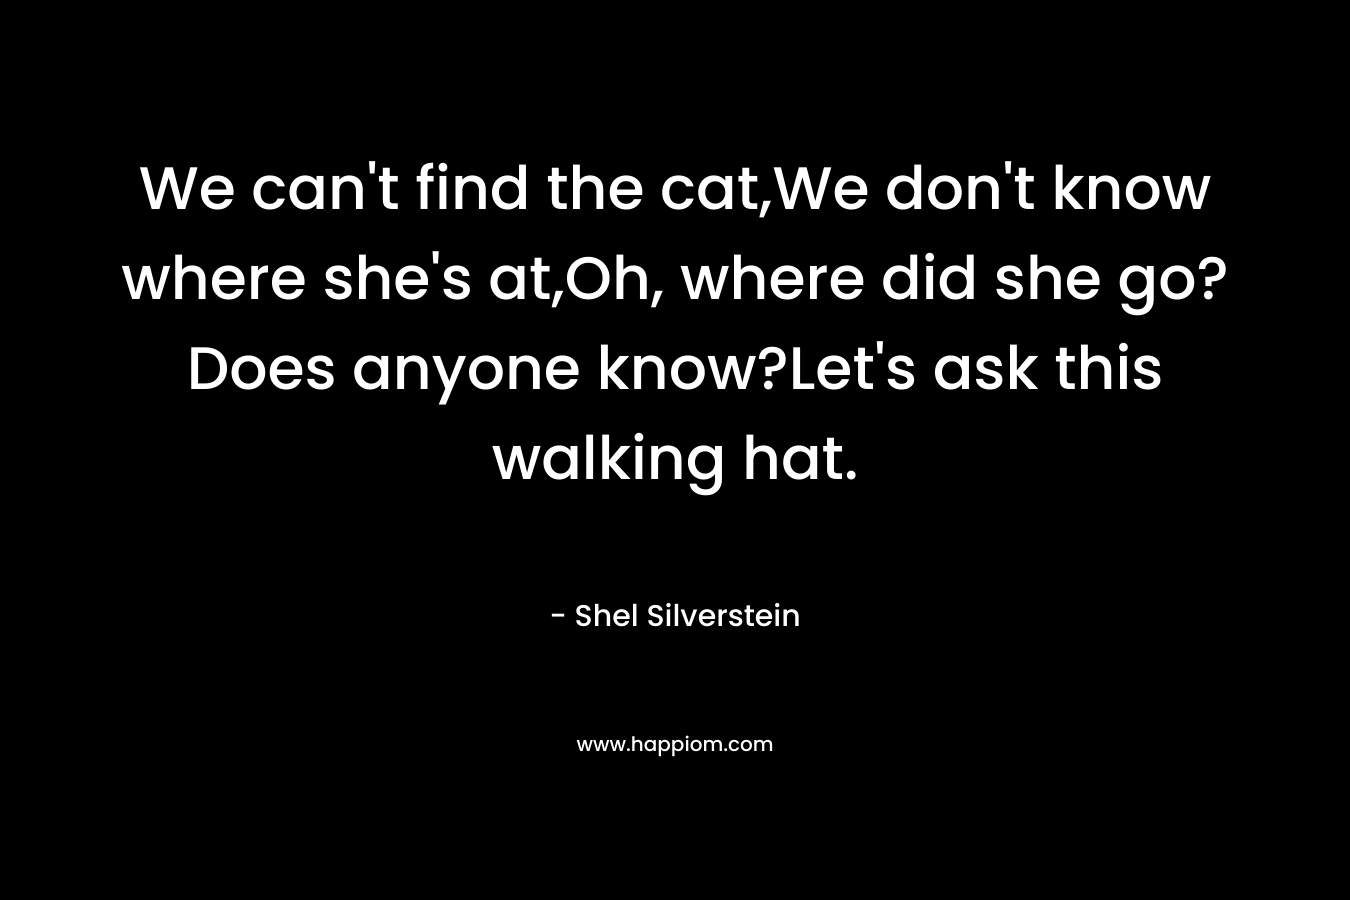 We can't find the cat,We don't know where she's at,Oh, where did she go?Does anyone know?Let's ask this walking hat.